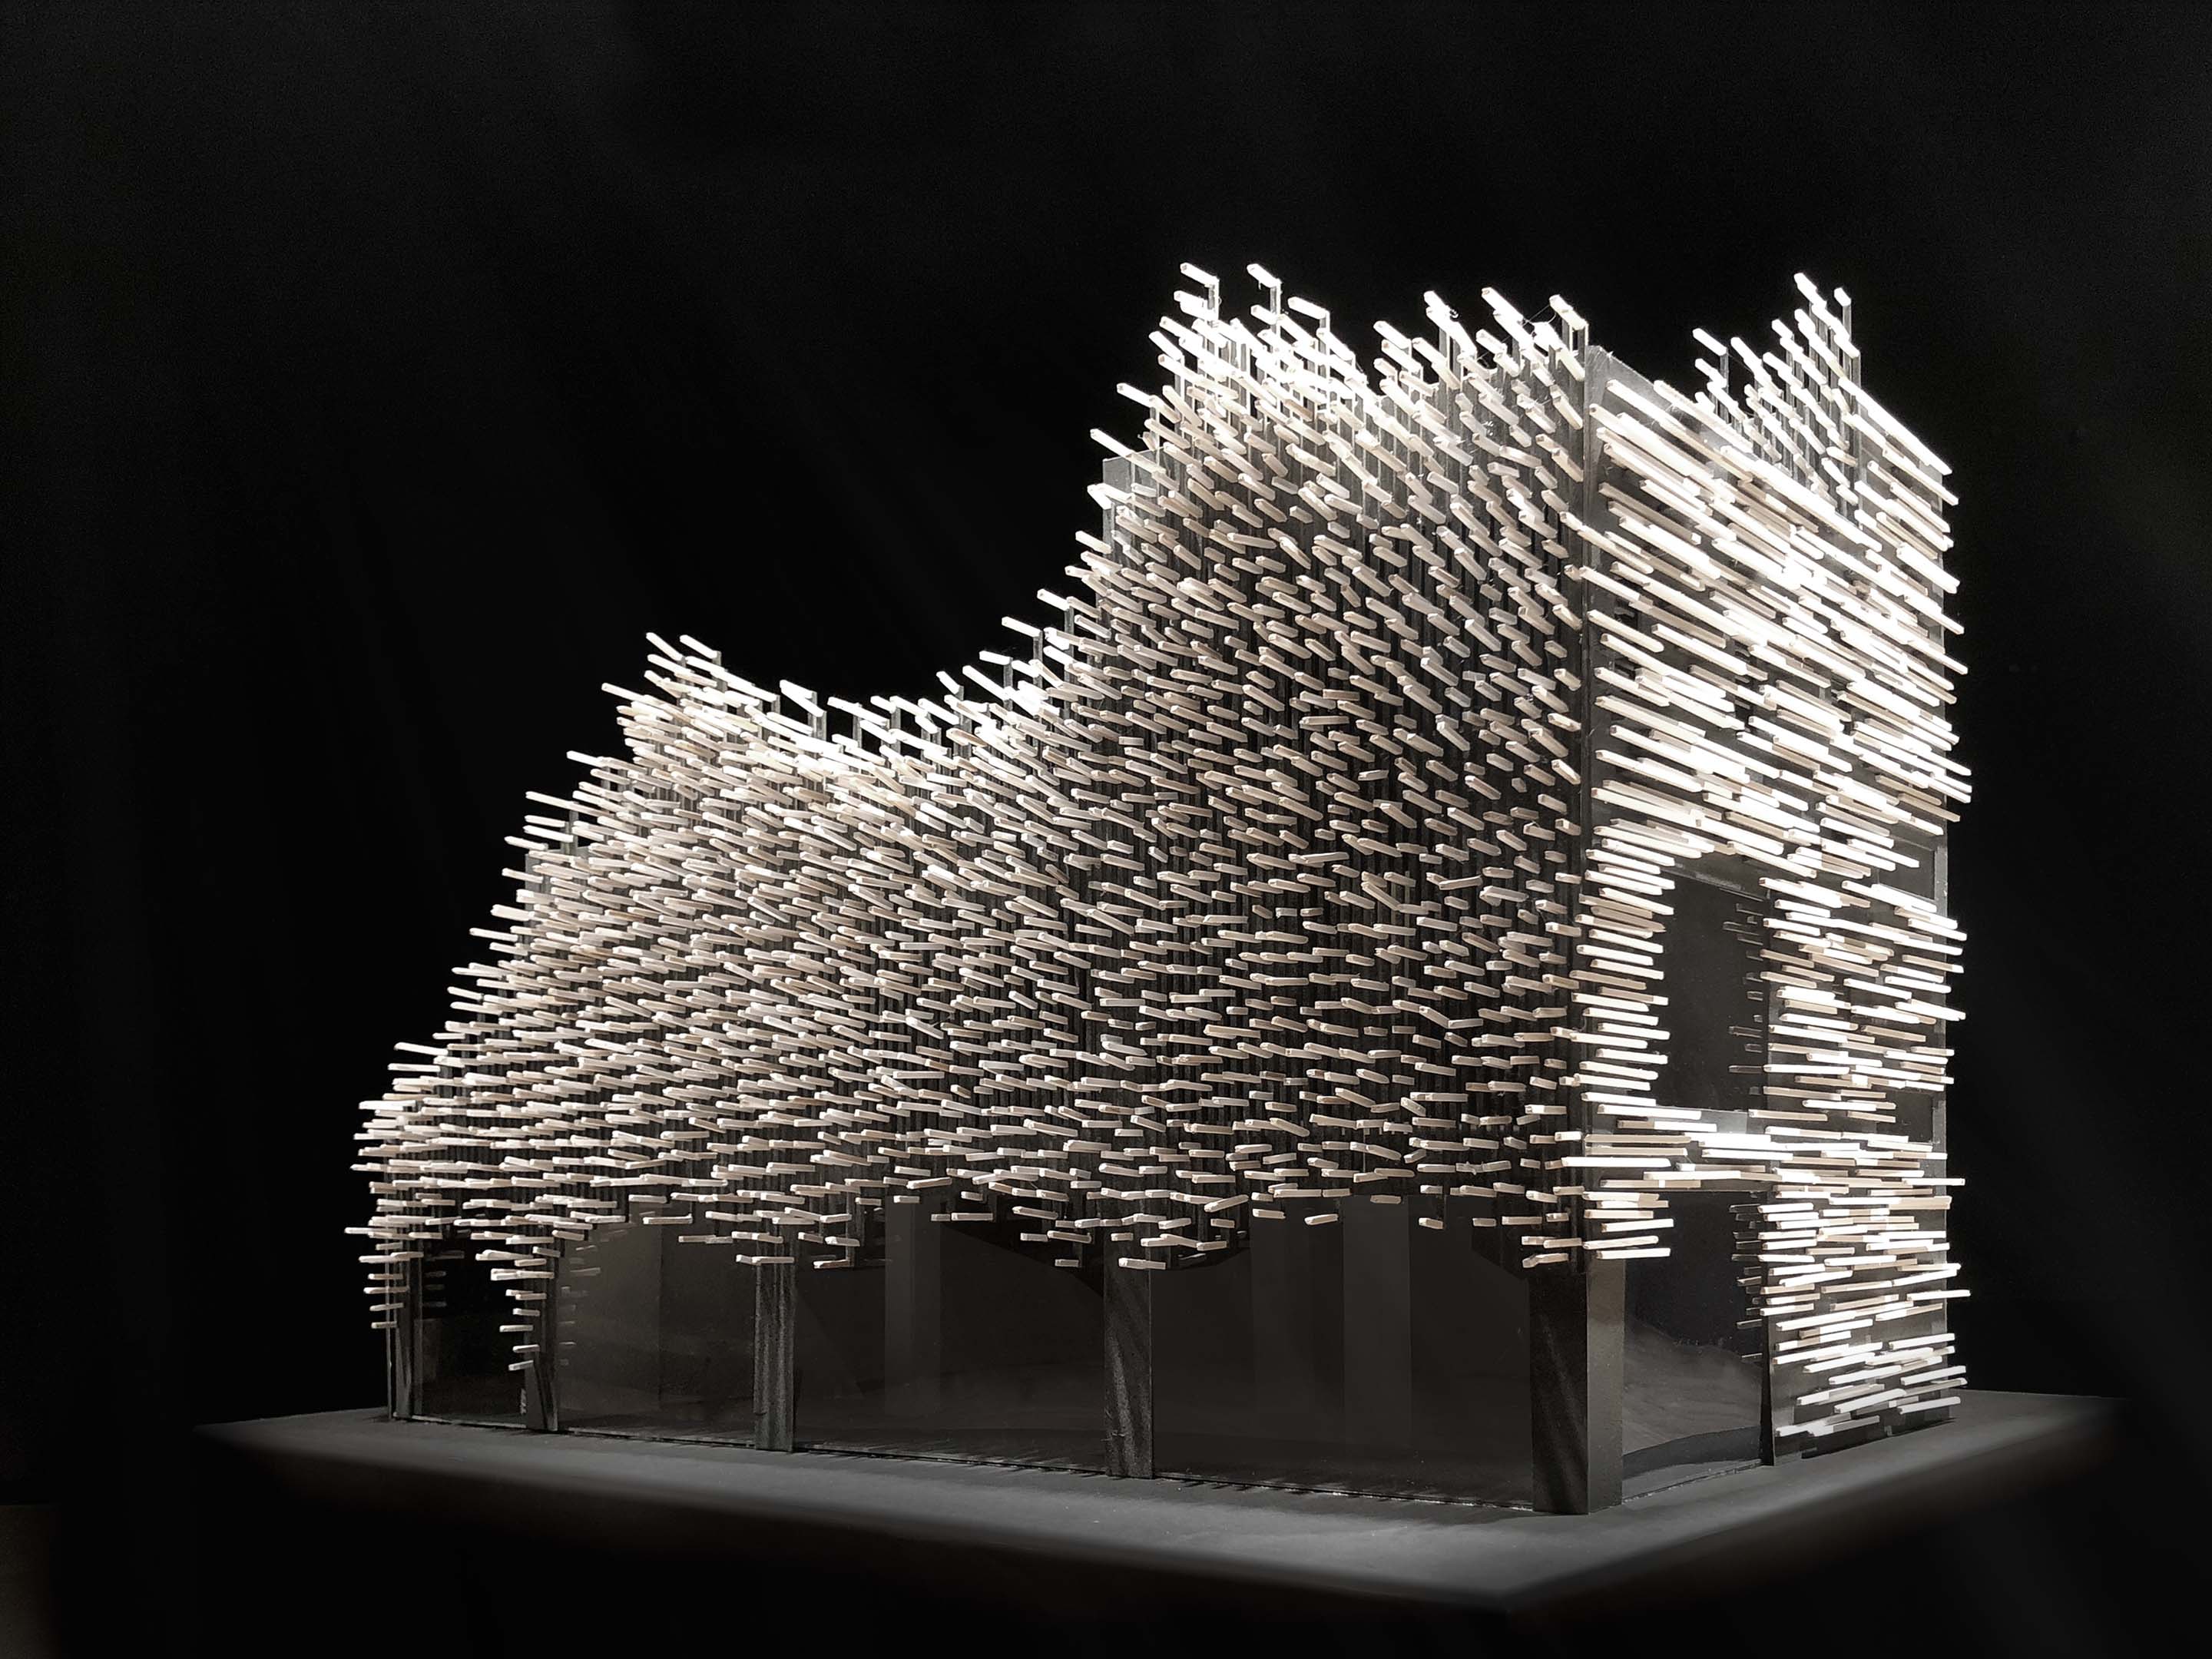 A scale model of a wave-like building with aluminum rods all over